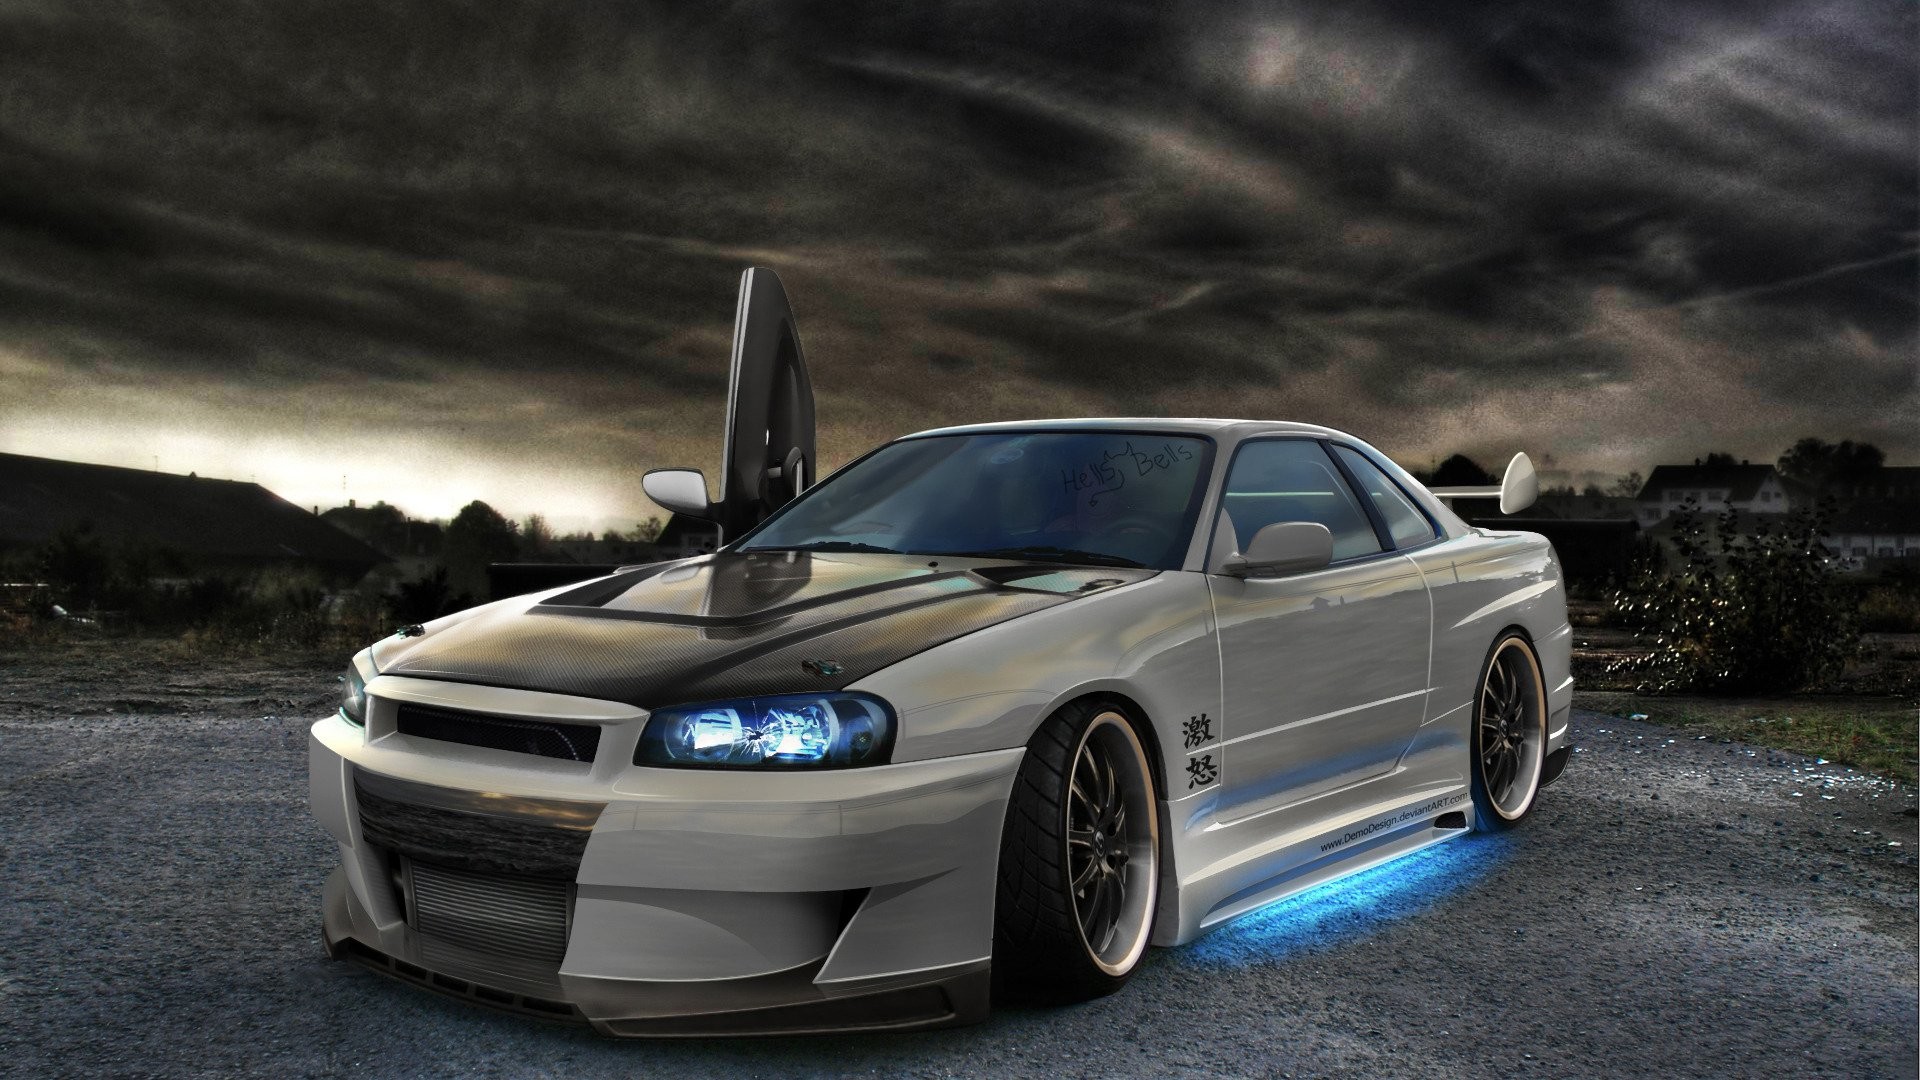 1920x1080 nissan skyline gtr Android Wallpapers HD Cars Pinterest